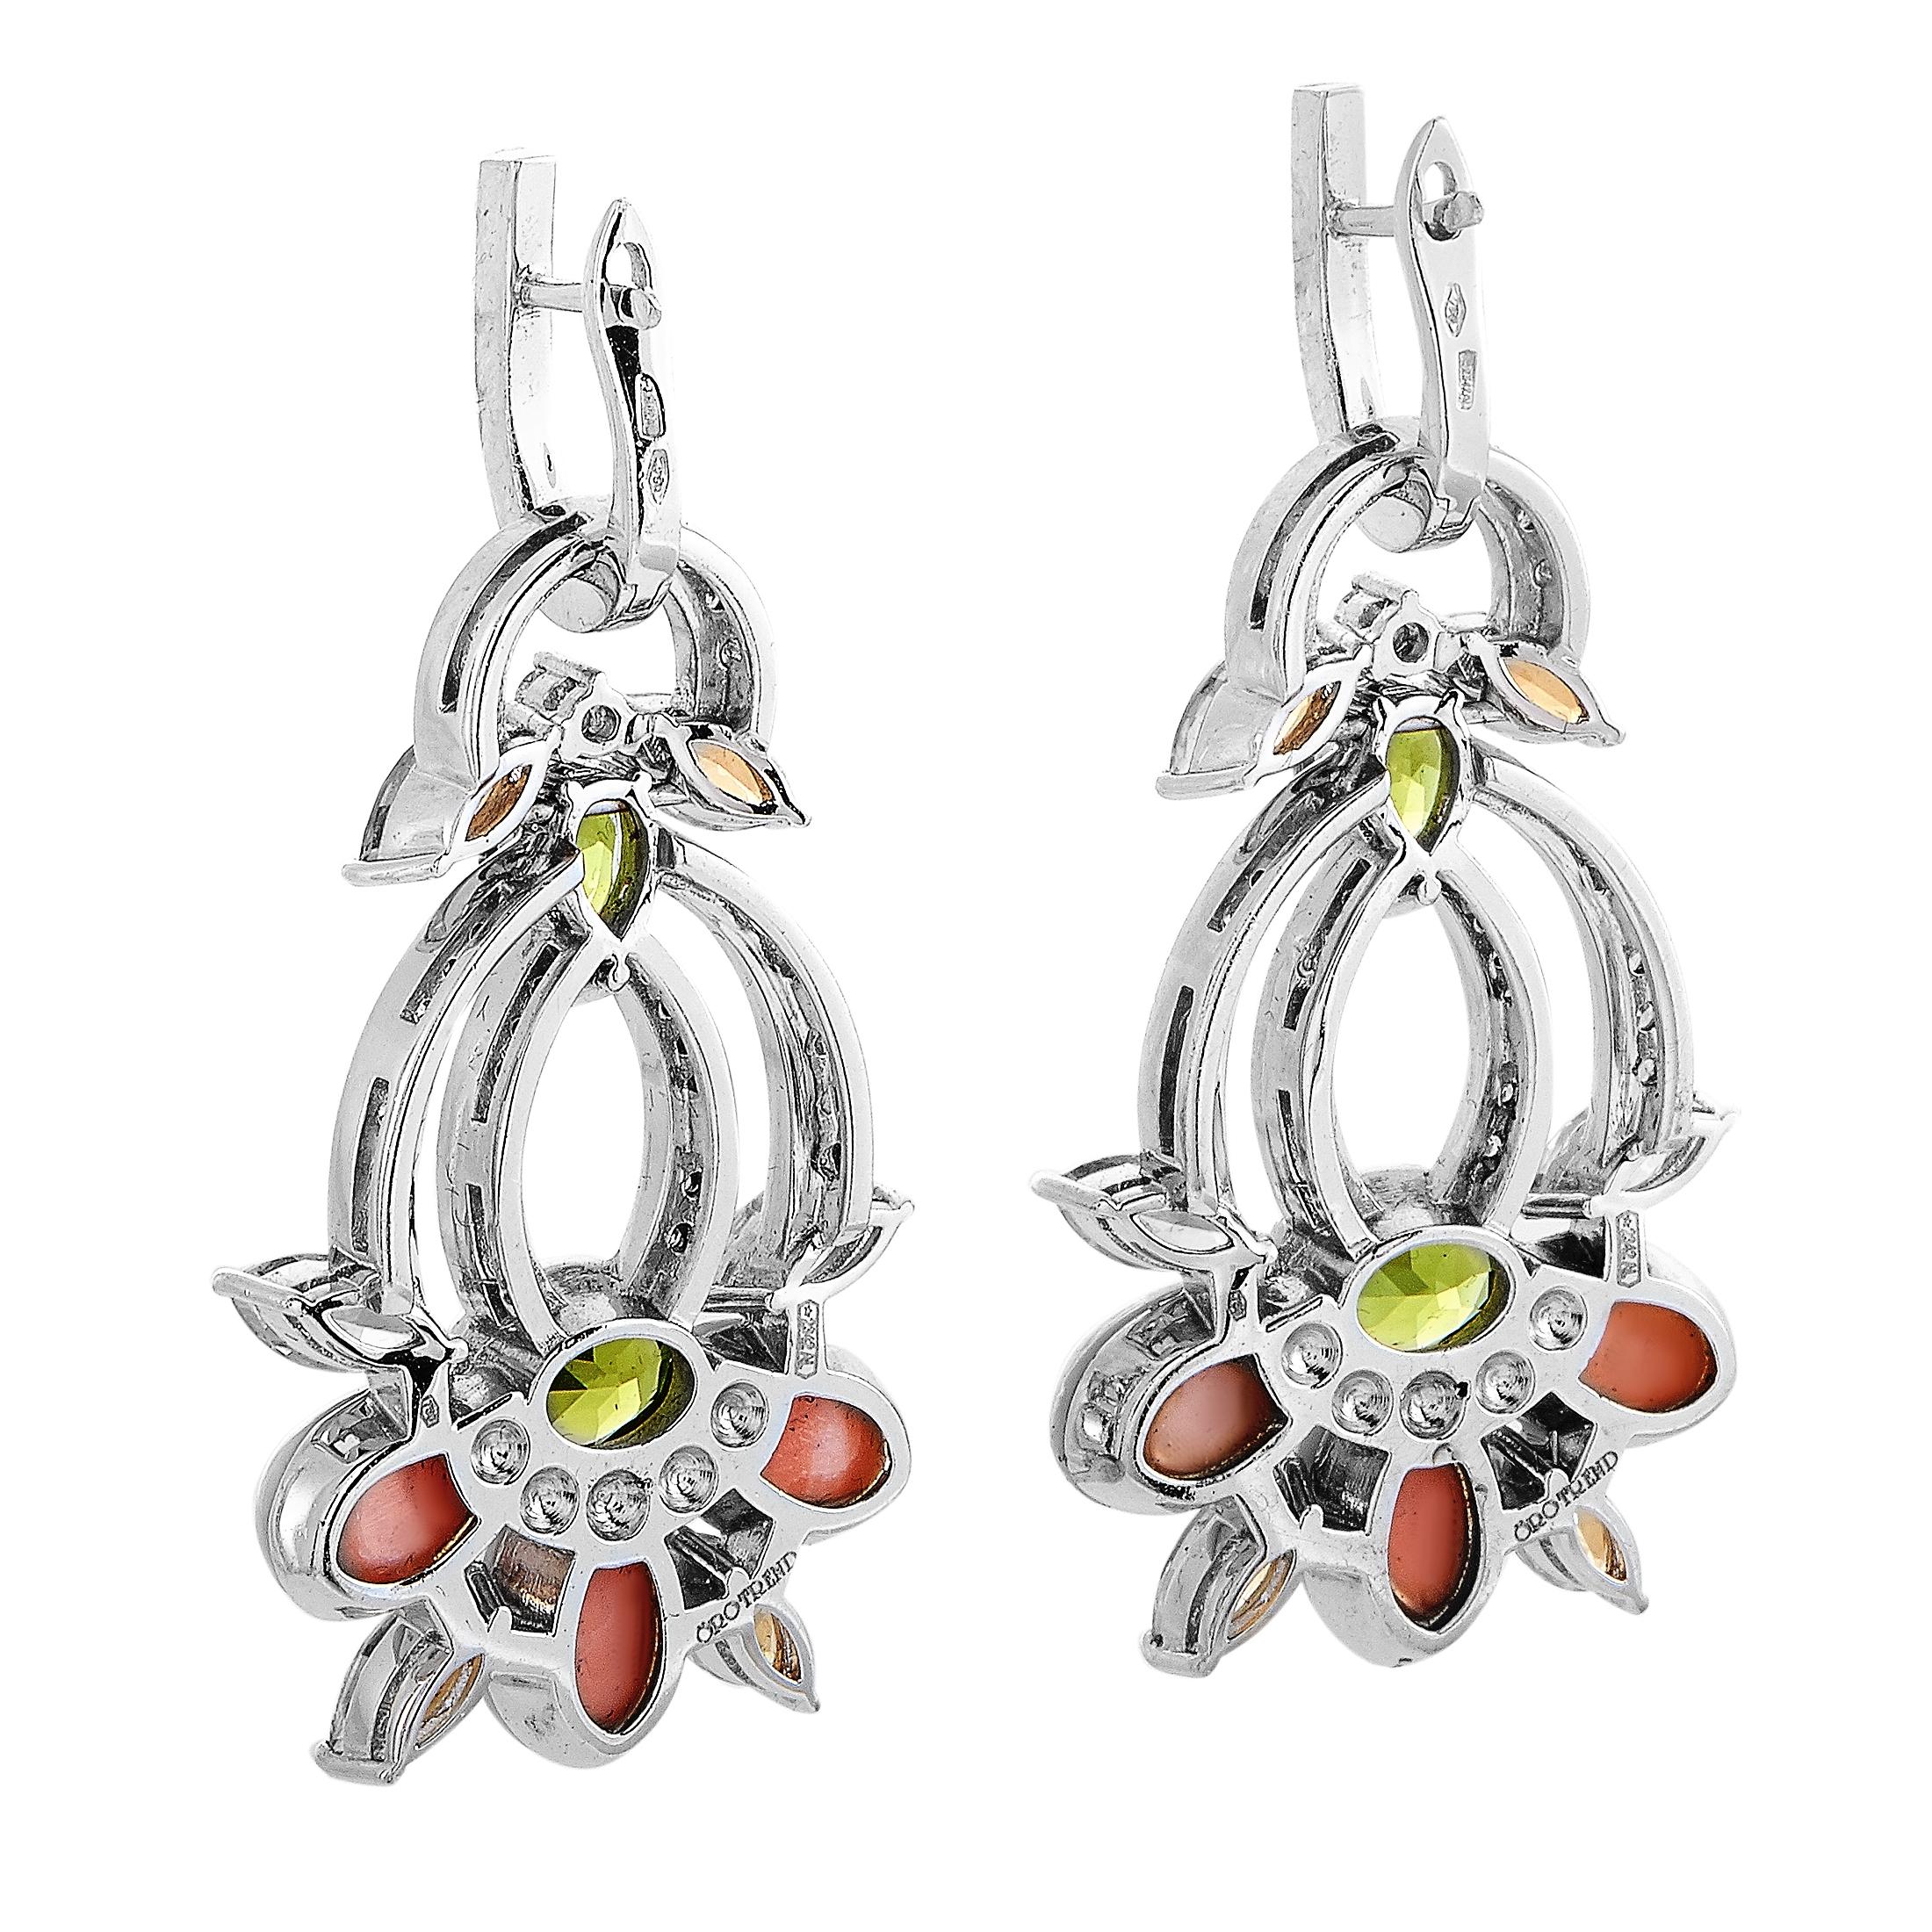 These Oro Trend earrings are crafted from 18K white gold and embellished with corals, peridot and imperial topaz stones, and with a total of 1.10 carats of diamonds. The earrings measure 2” in length and 1” in width and each of the two weighs 11.5